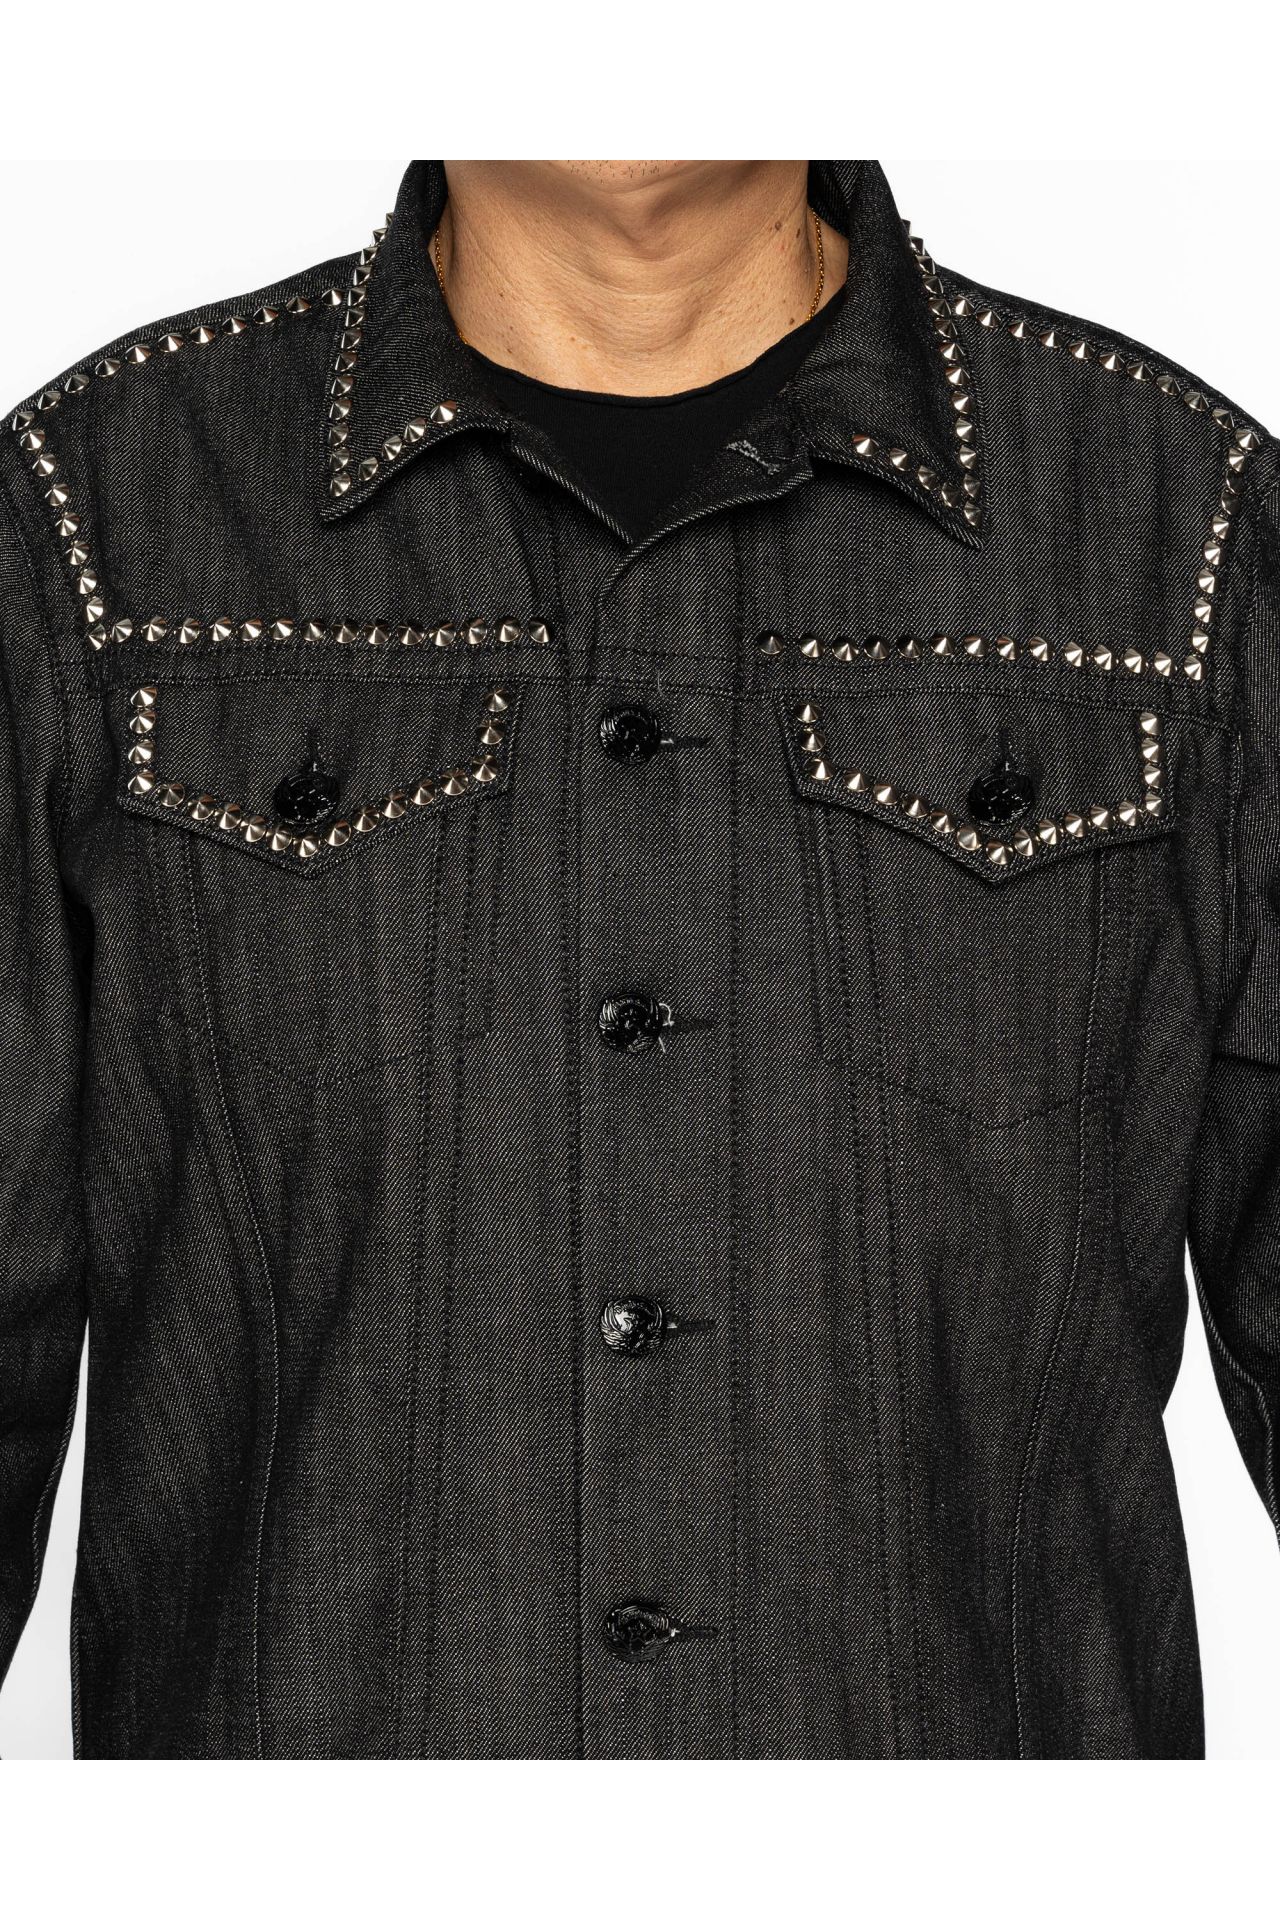 ROBINS RAW DENIM COLLECTION MENS JACKET IN RAW BLACK DENIM WITH PATCHES AND STUDS